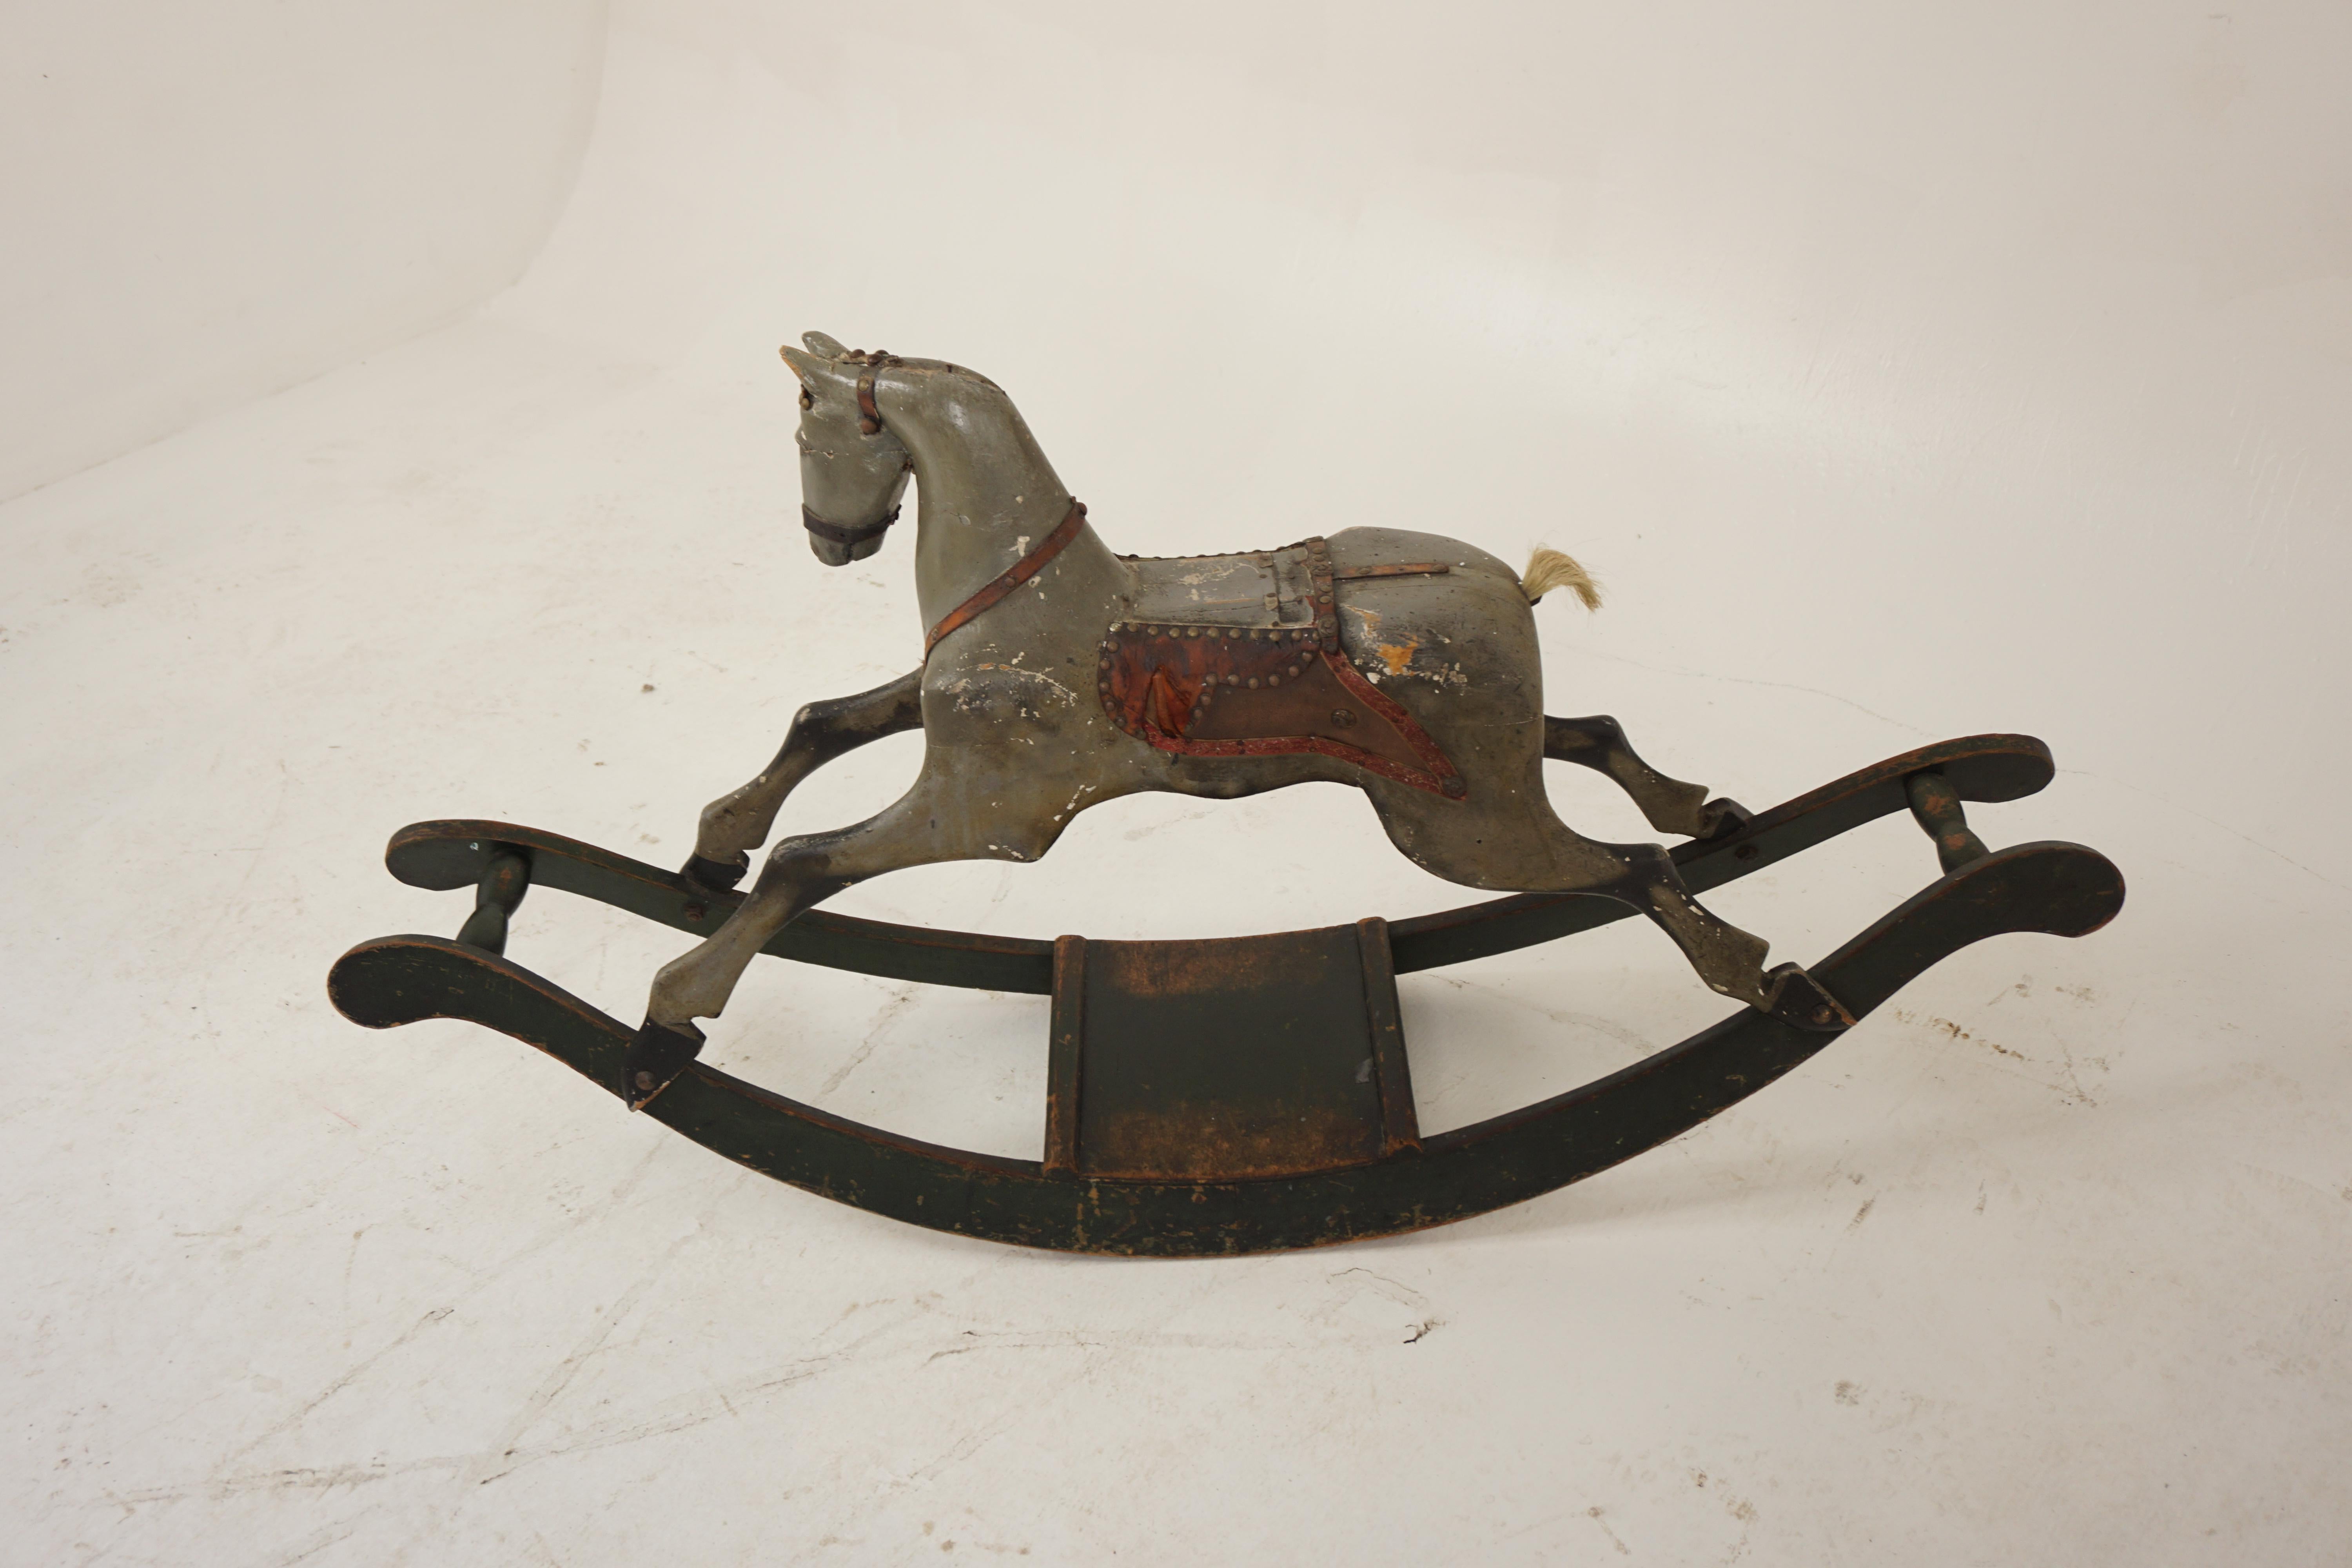 Antique Carved Painted Rocking Horse, Scotland 1860, H948

Scotland 1860
Solid Pine
Original Finish
Painted hues of grey and green
Horse hair tail
The well carved painted horse with flared nostrils and open mouth
The body with remnants of